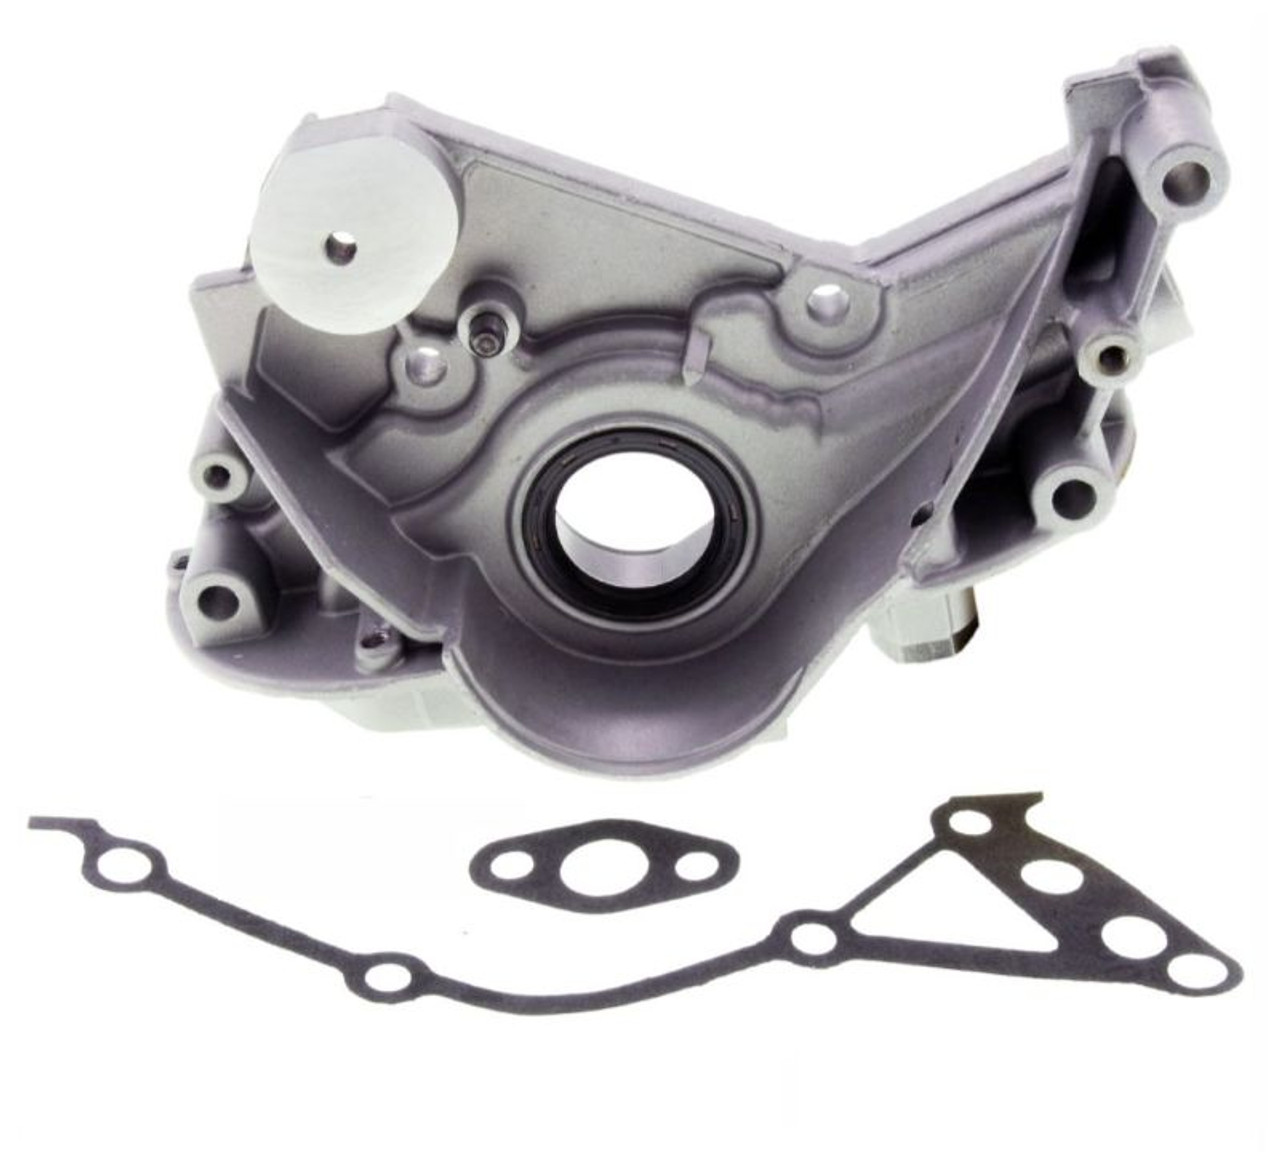 Oil Pump - 1993 Plymouth Grand Voyager 3.0L (EPK129.F57)